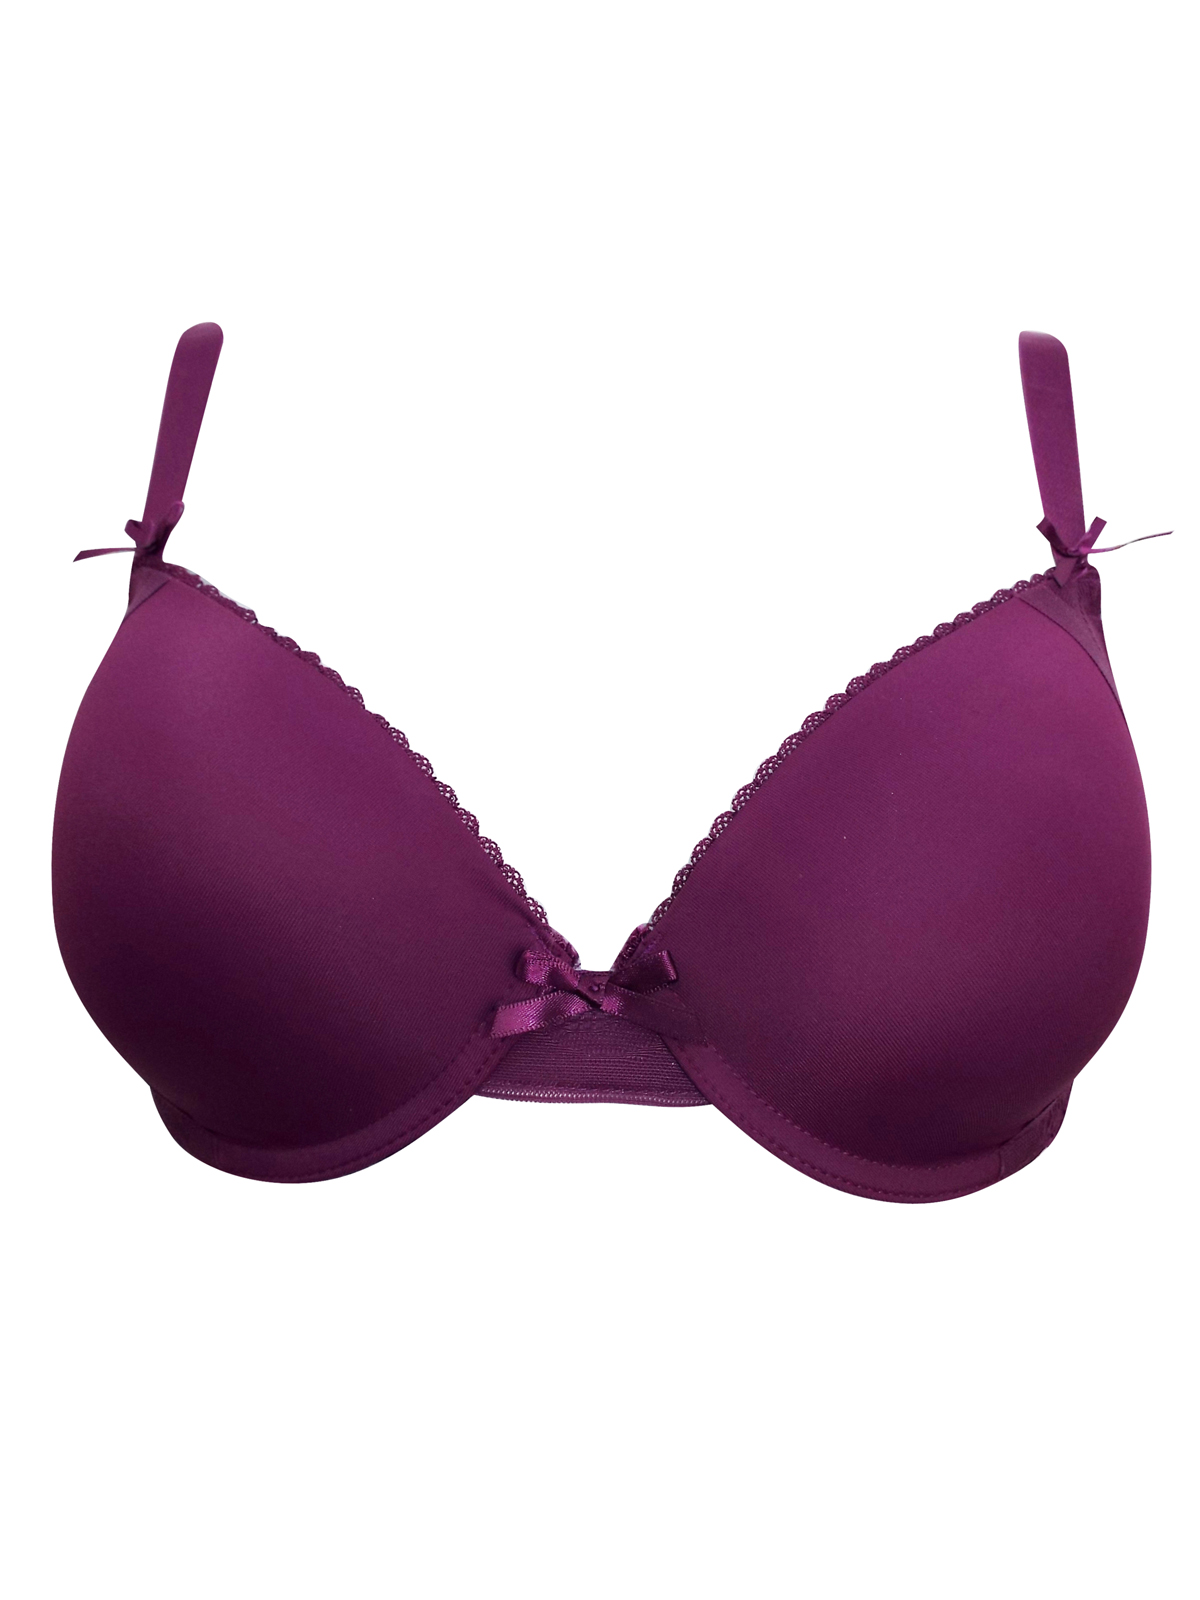 Cybele - - Cybele PURPLE Scallop Trim Wired & Padded Bra - Size 34 to ...